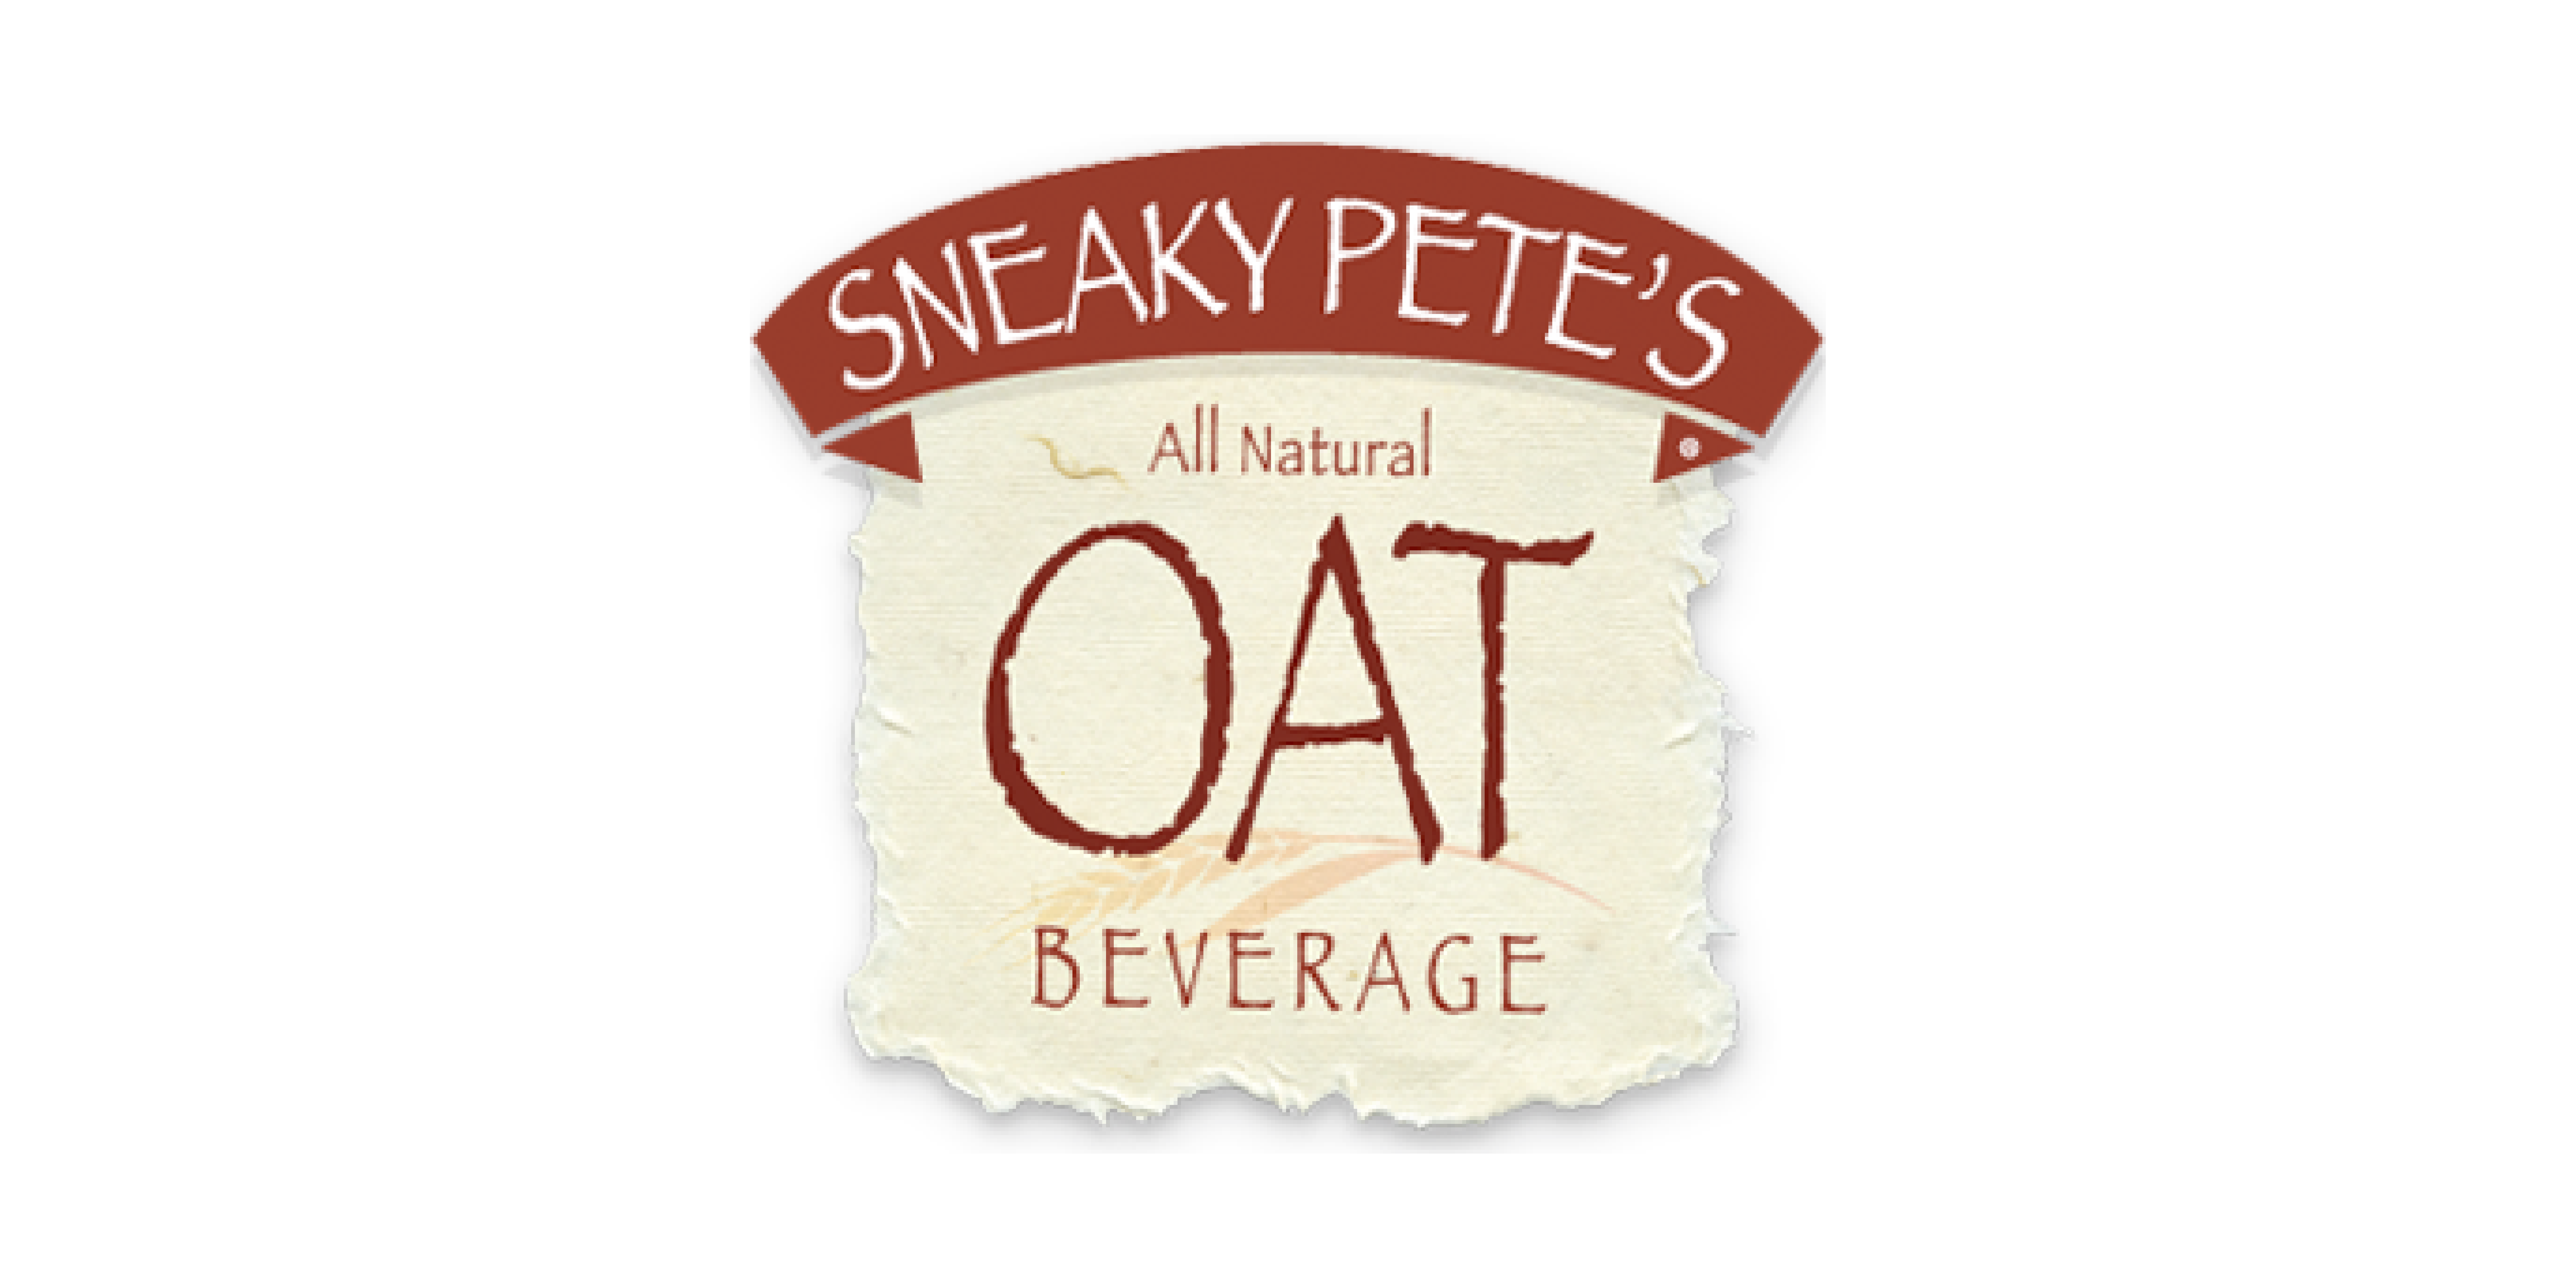 Sneaky Pete’s